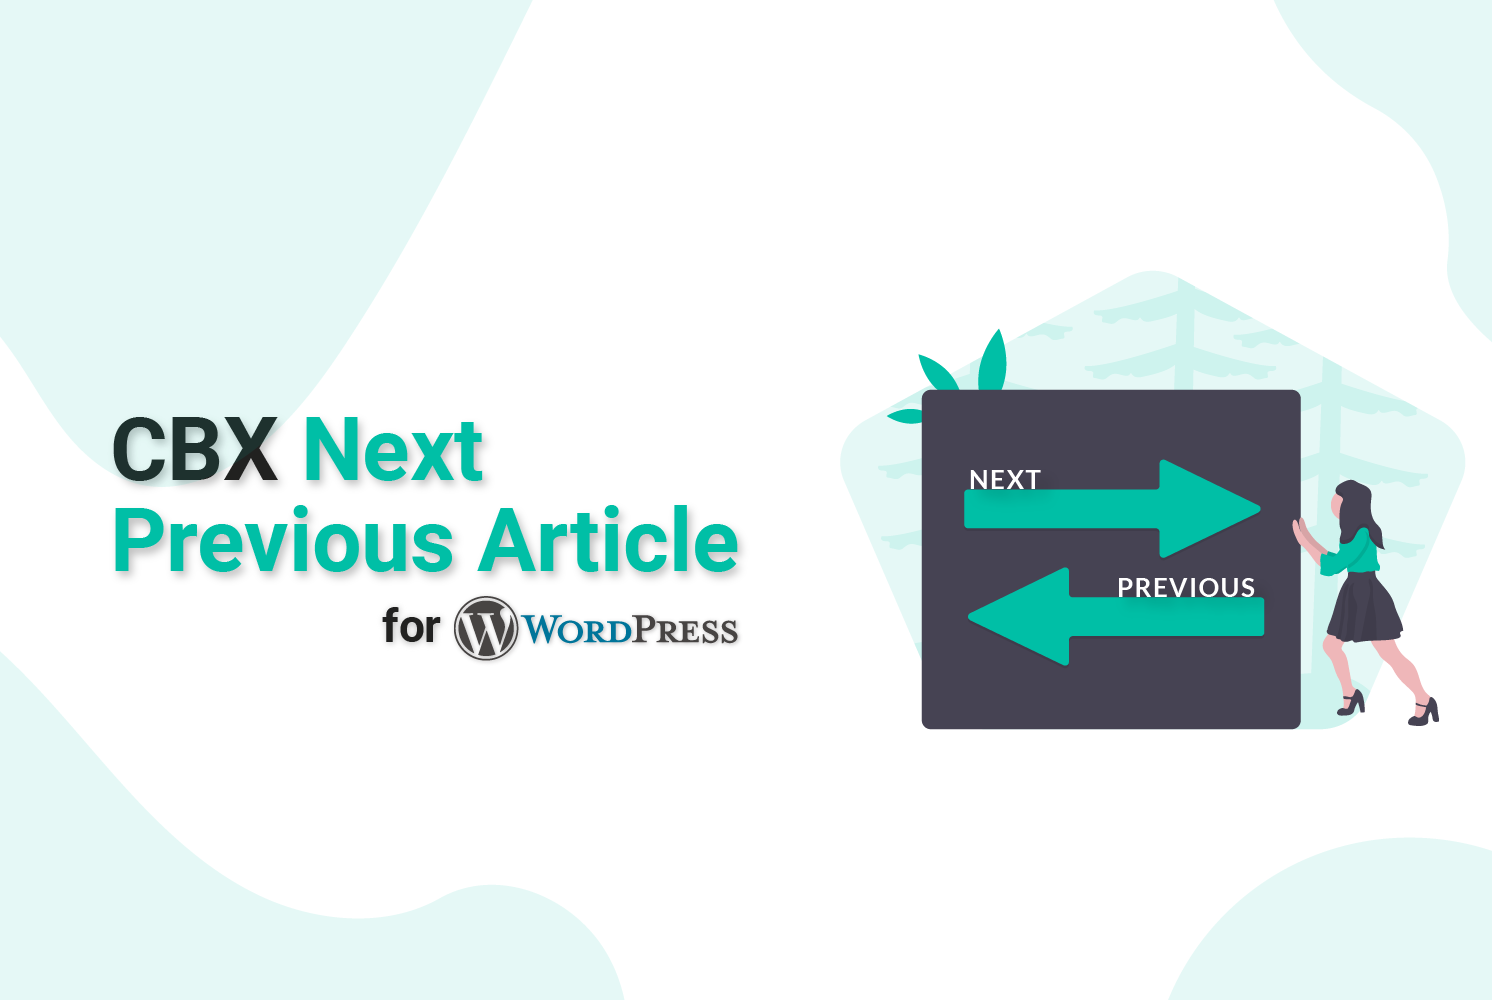 CBX Next Previous Article for WordPress